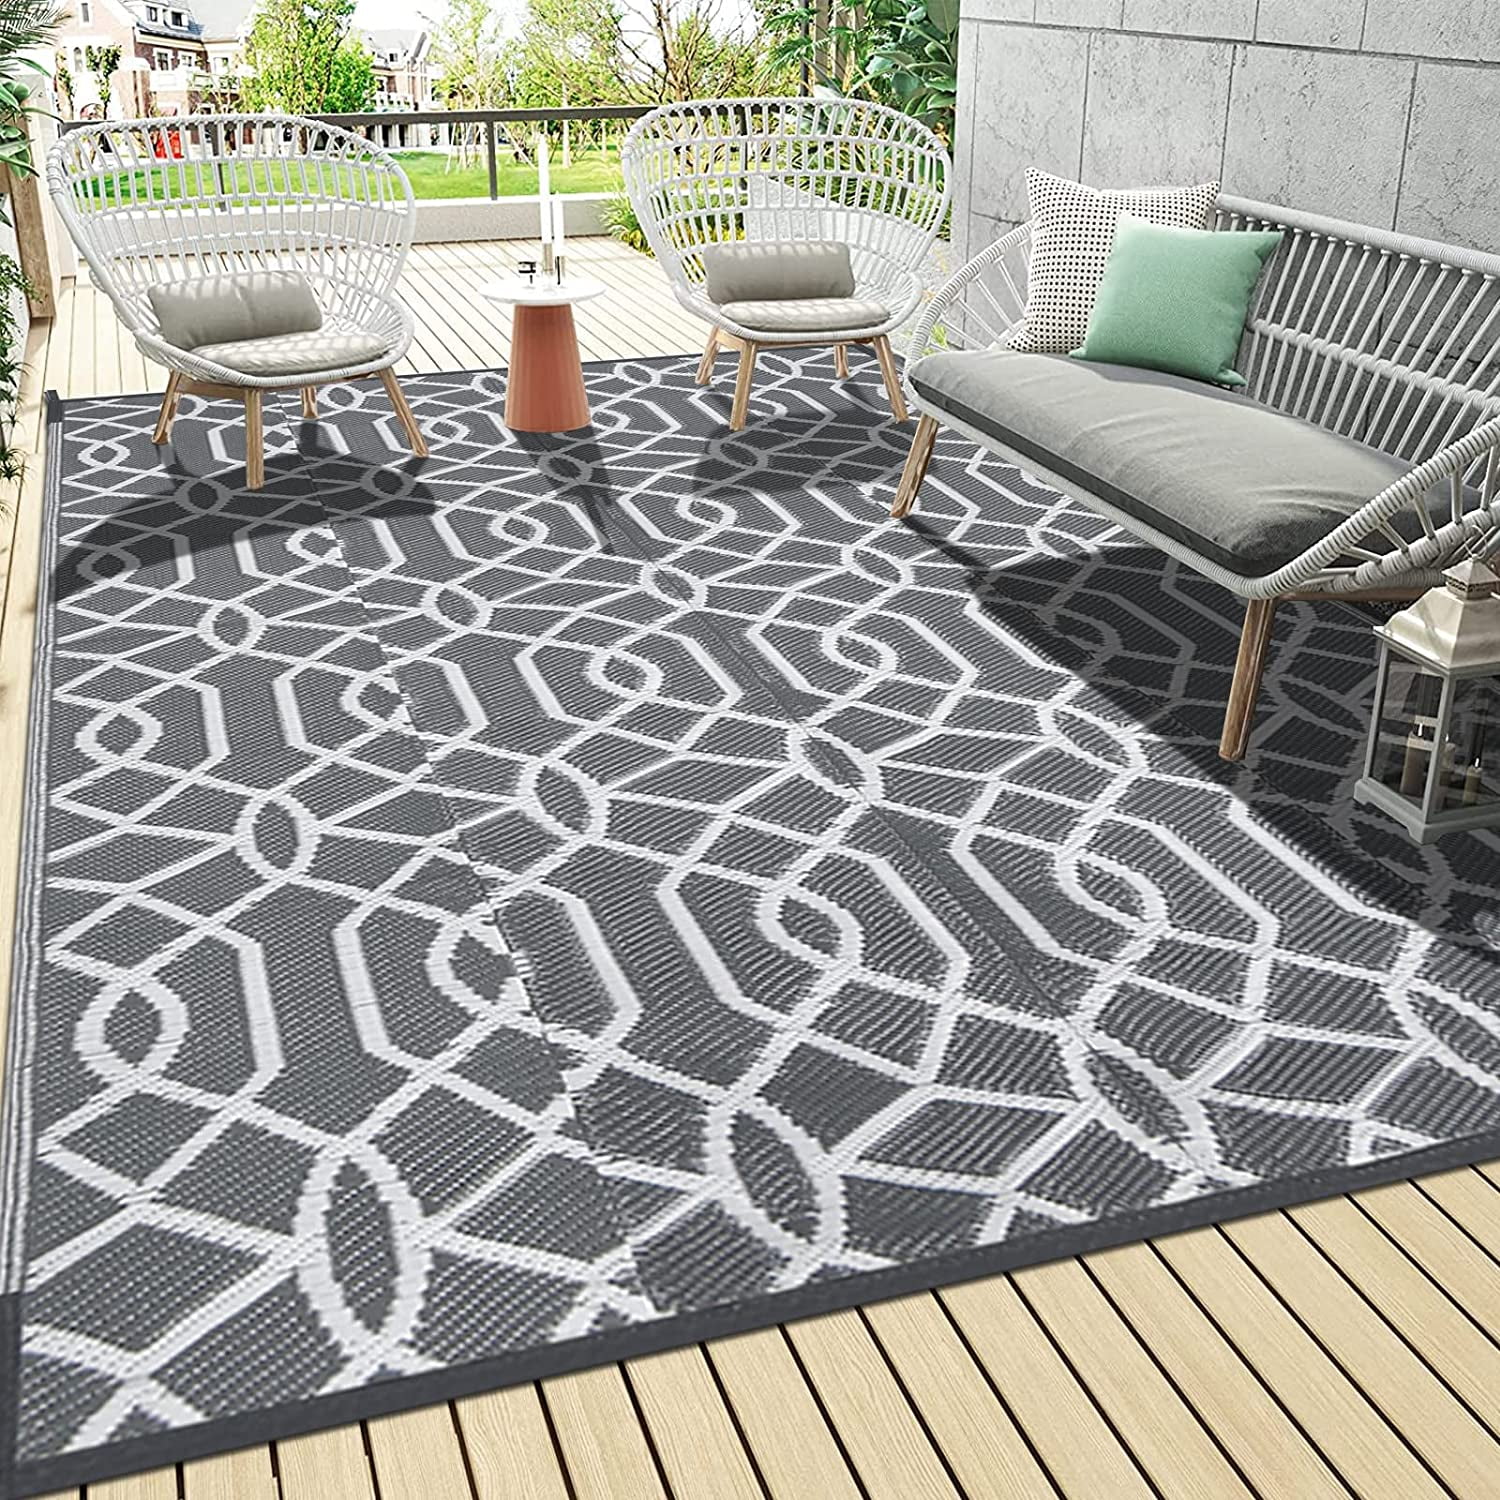 Findosom 9'x 12' Gray Large Outdoor Rug RV Outdoor Rug Reversible